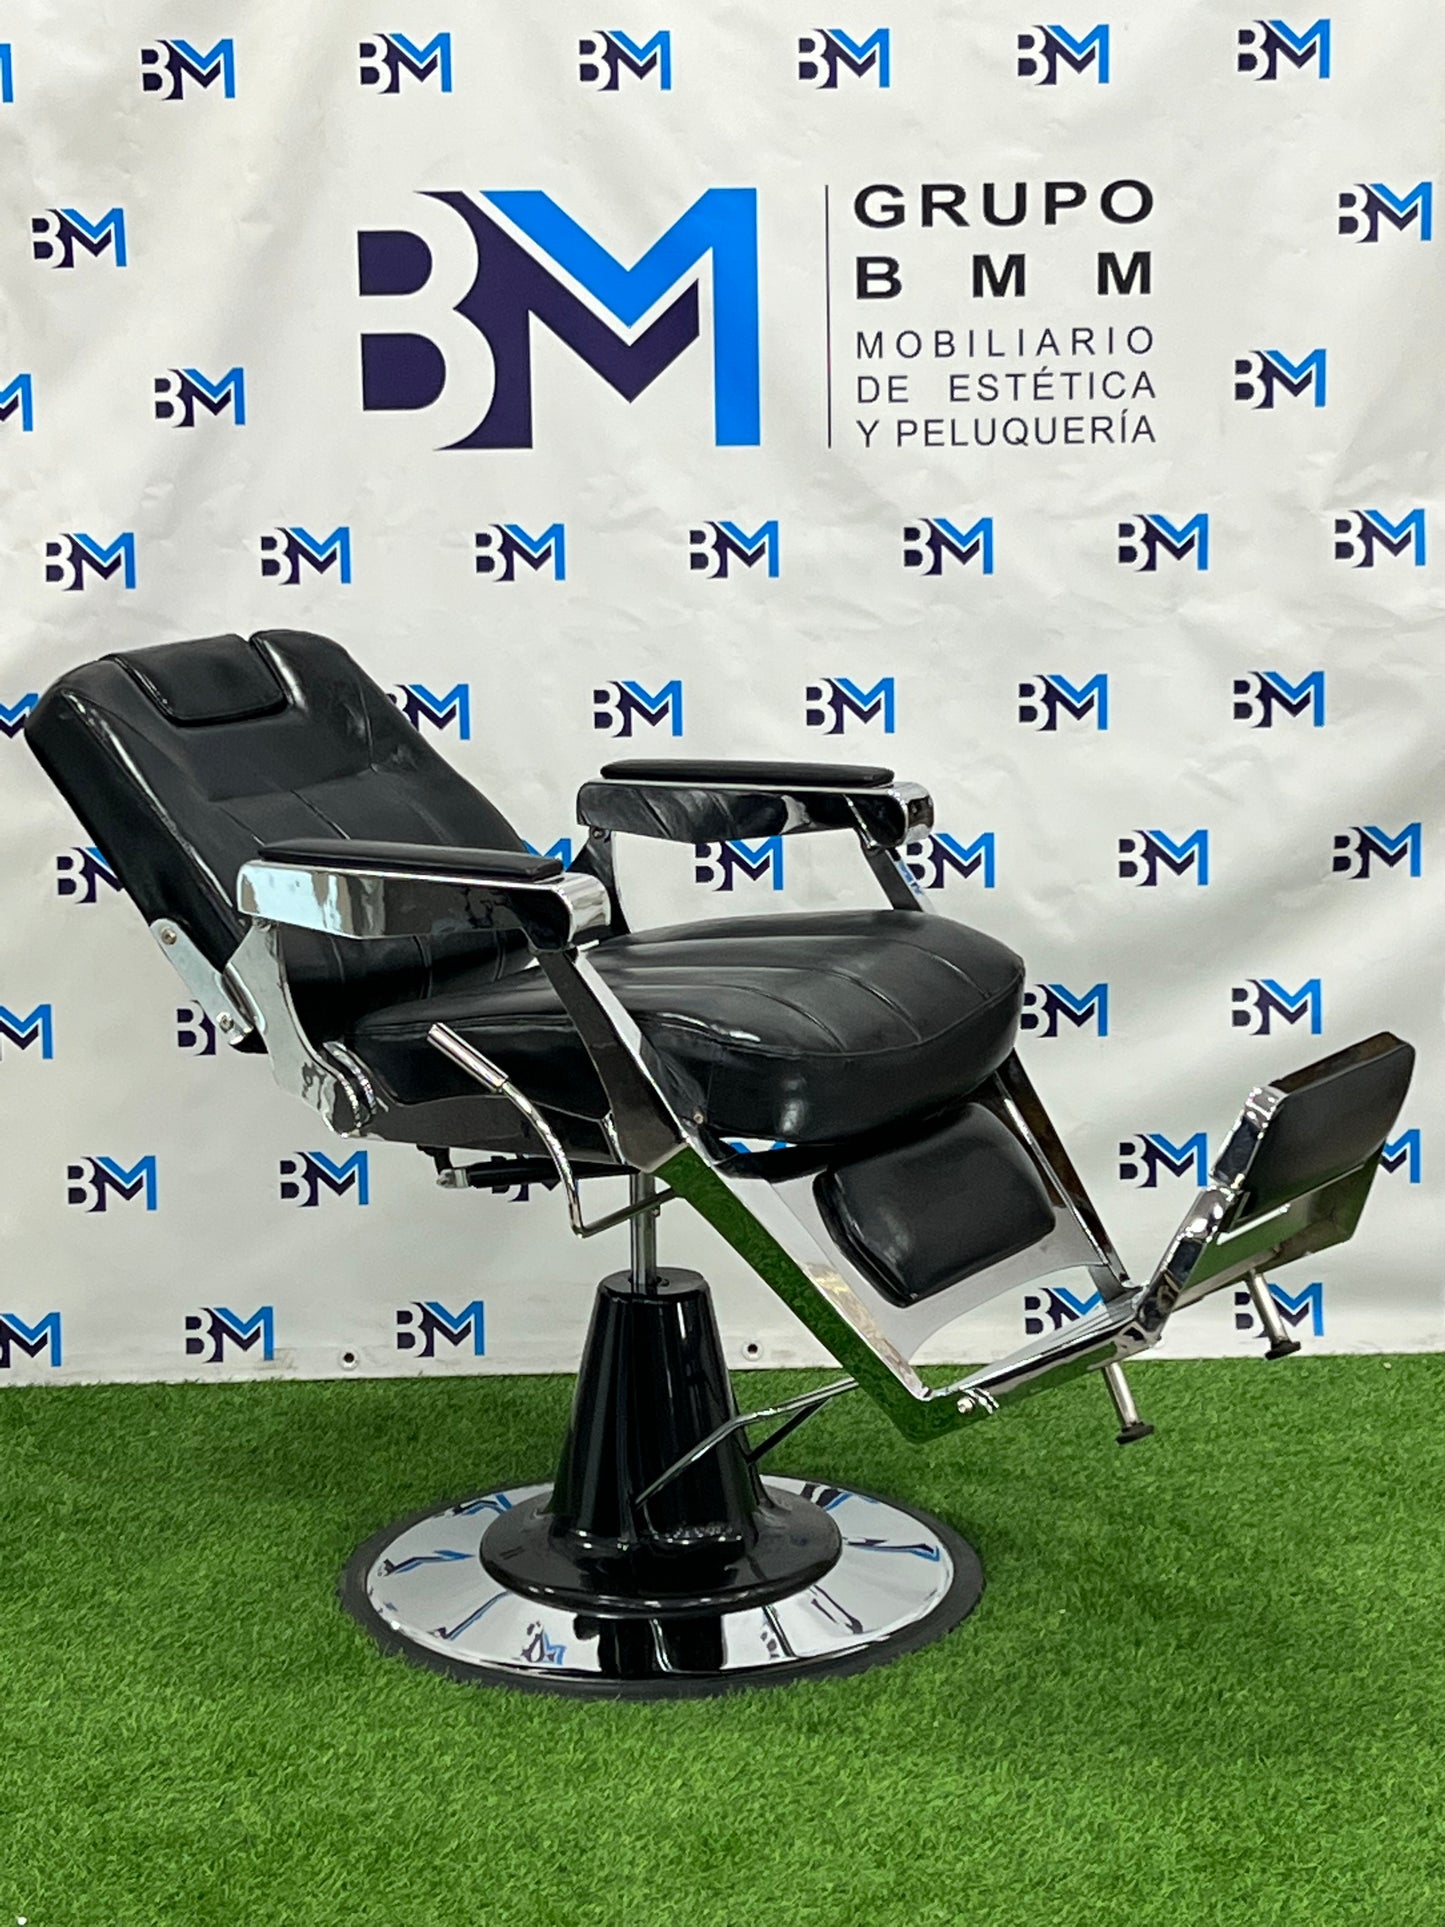 Classic style black and silver barber chair